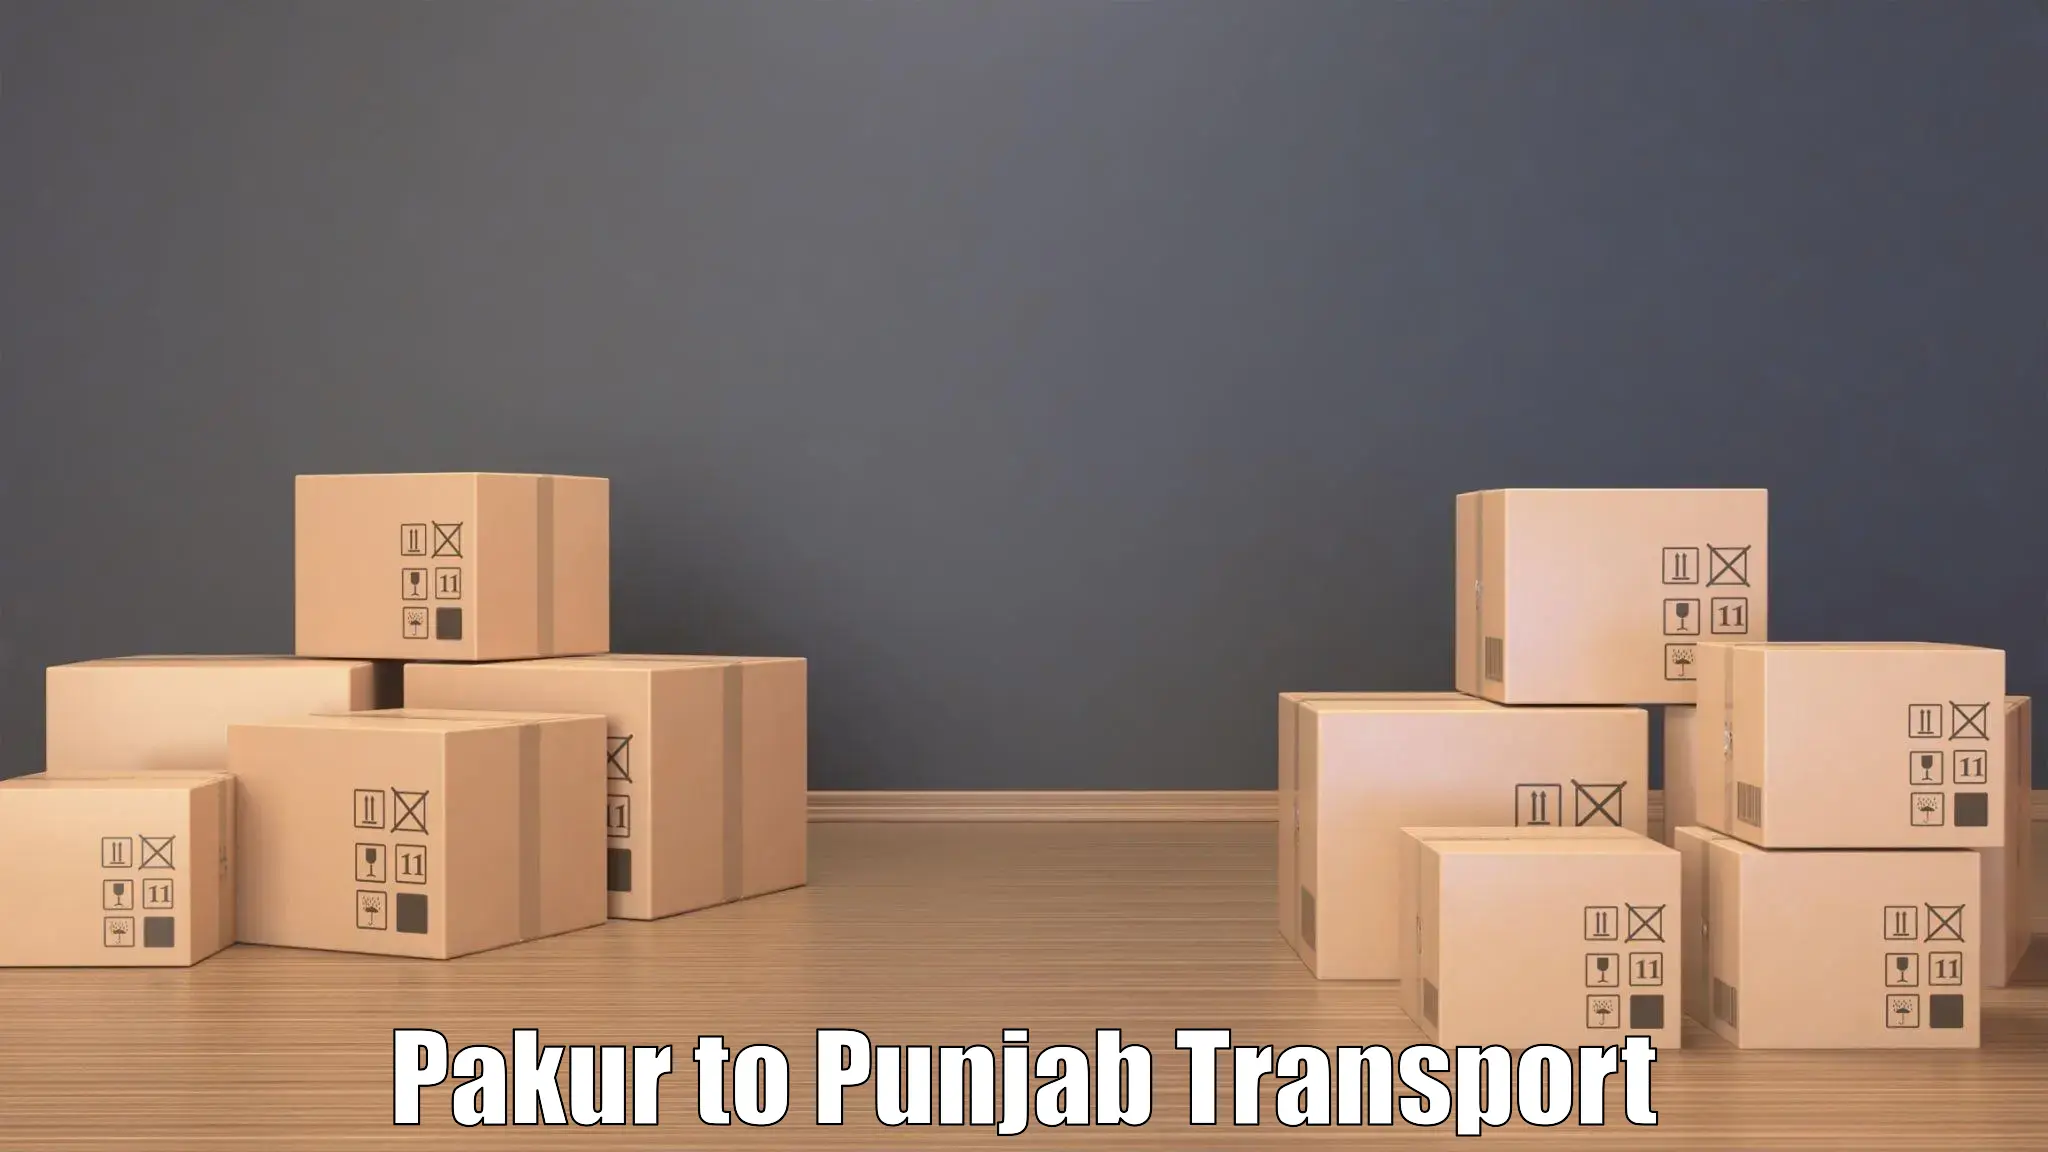 Daily parcel service transport Pakur to Begowal